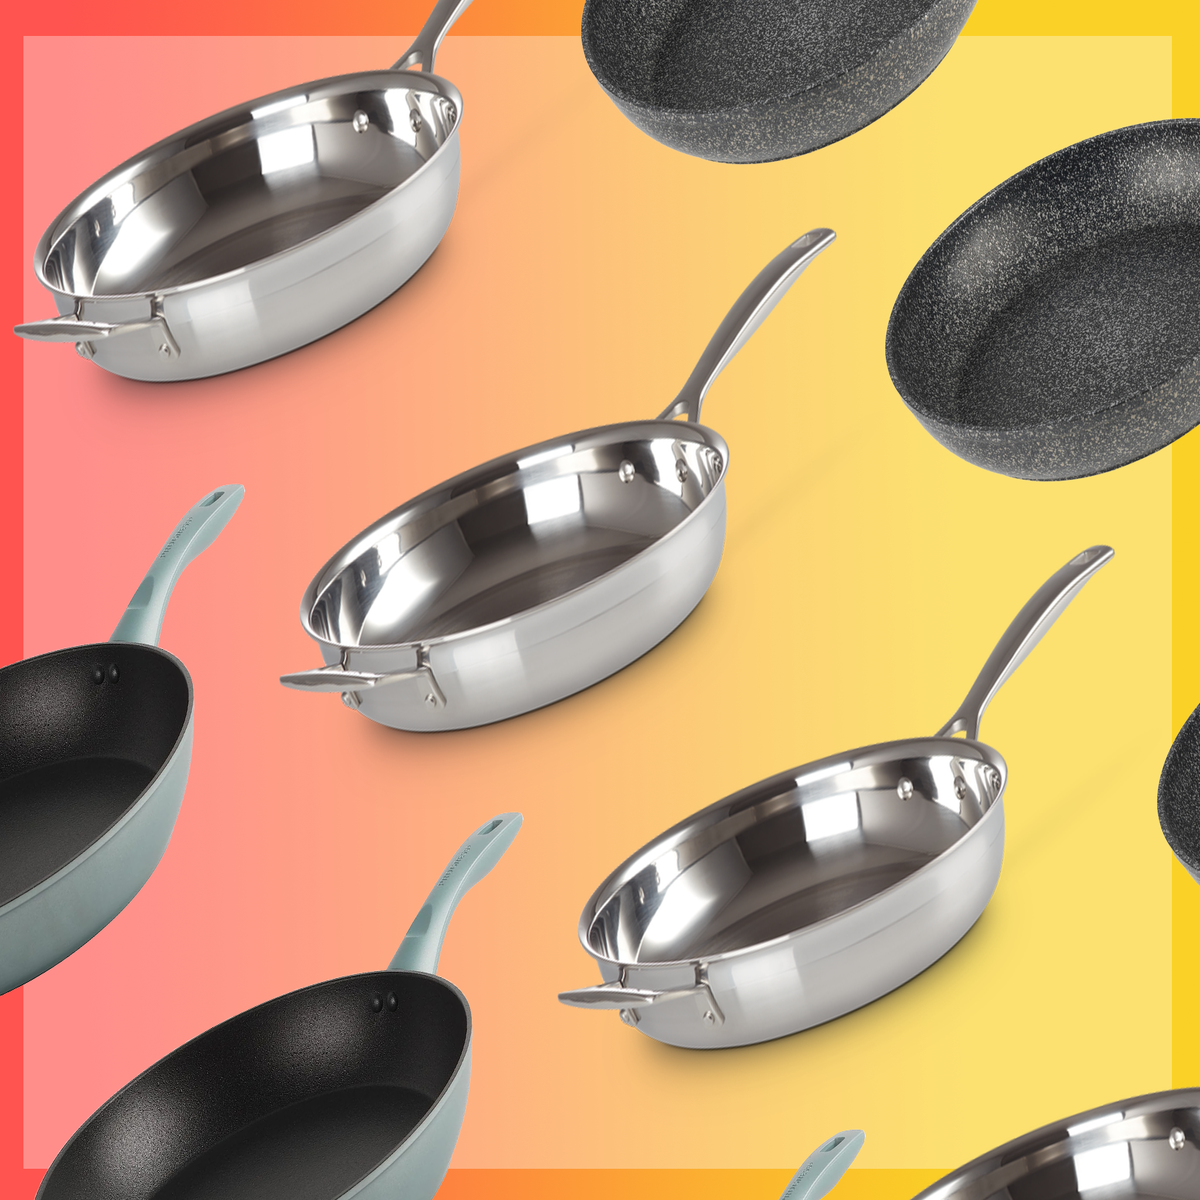 https://static.independent.co.uk/2023/07/06/08/best%20non%20stick%20frying%20pans.png?width=1200&height=1200&fit=crop